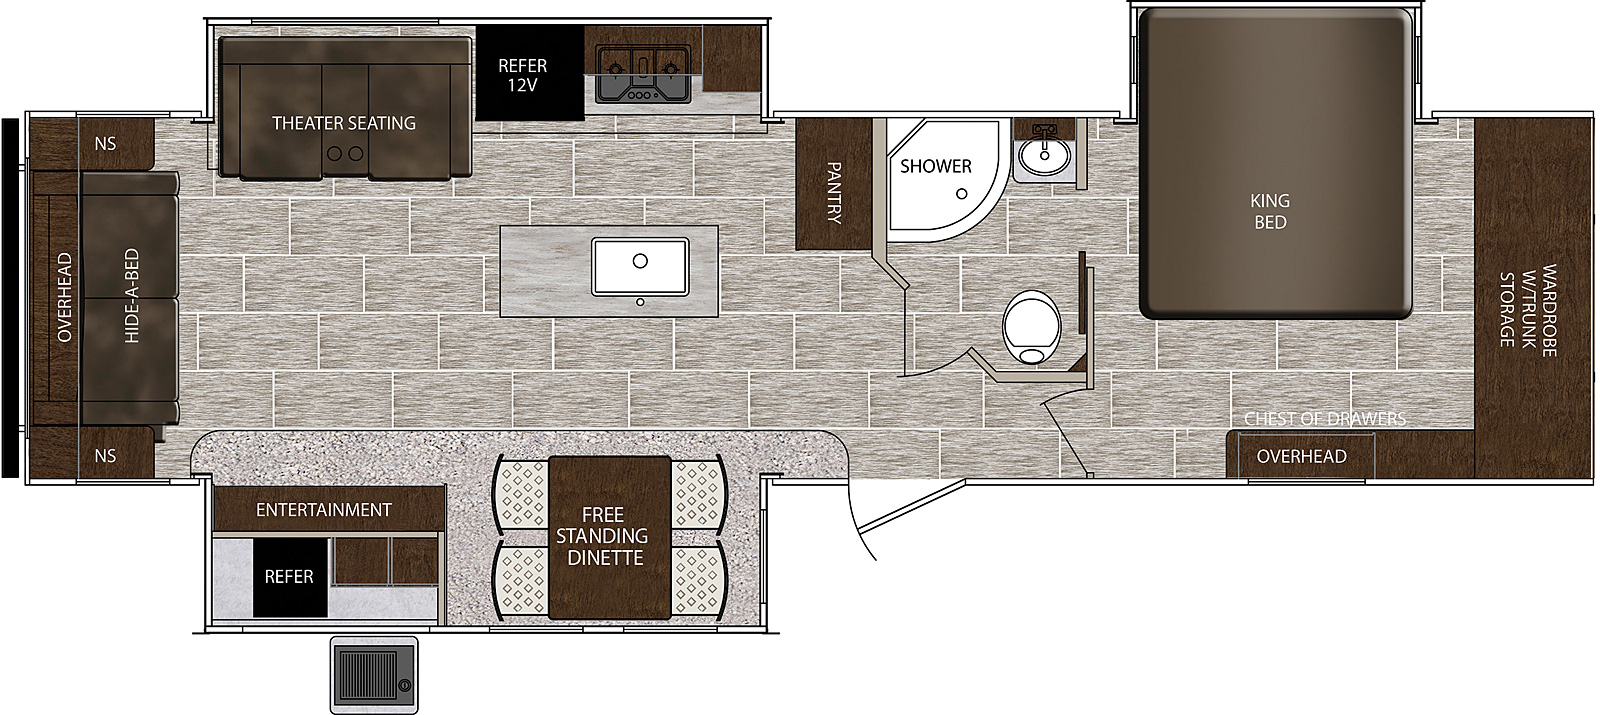 LaCrosse 3399SE floorplan. The 3399SE has 3 slide outs and one entry door.